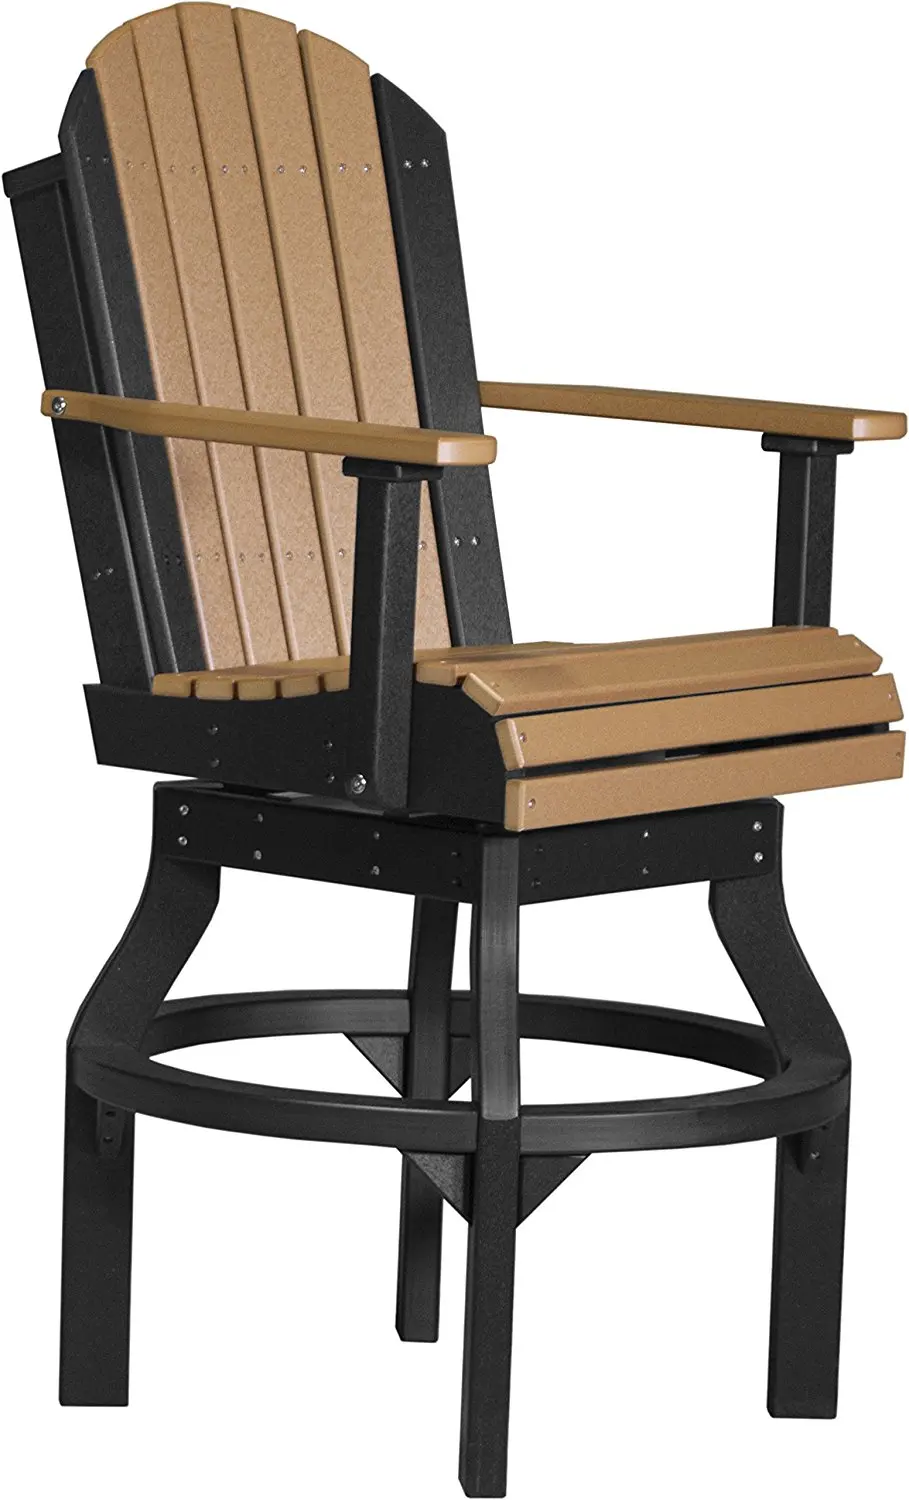 Cheap Bar Height Patio Set With Swivel Chairs, find Bar Height Patio